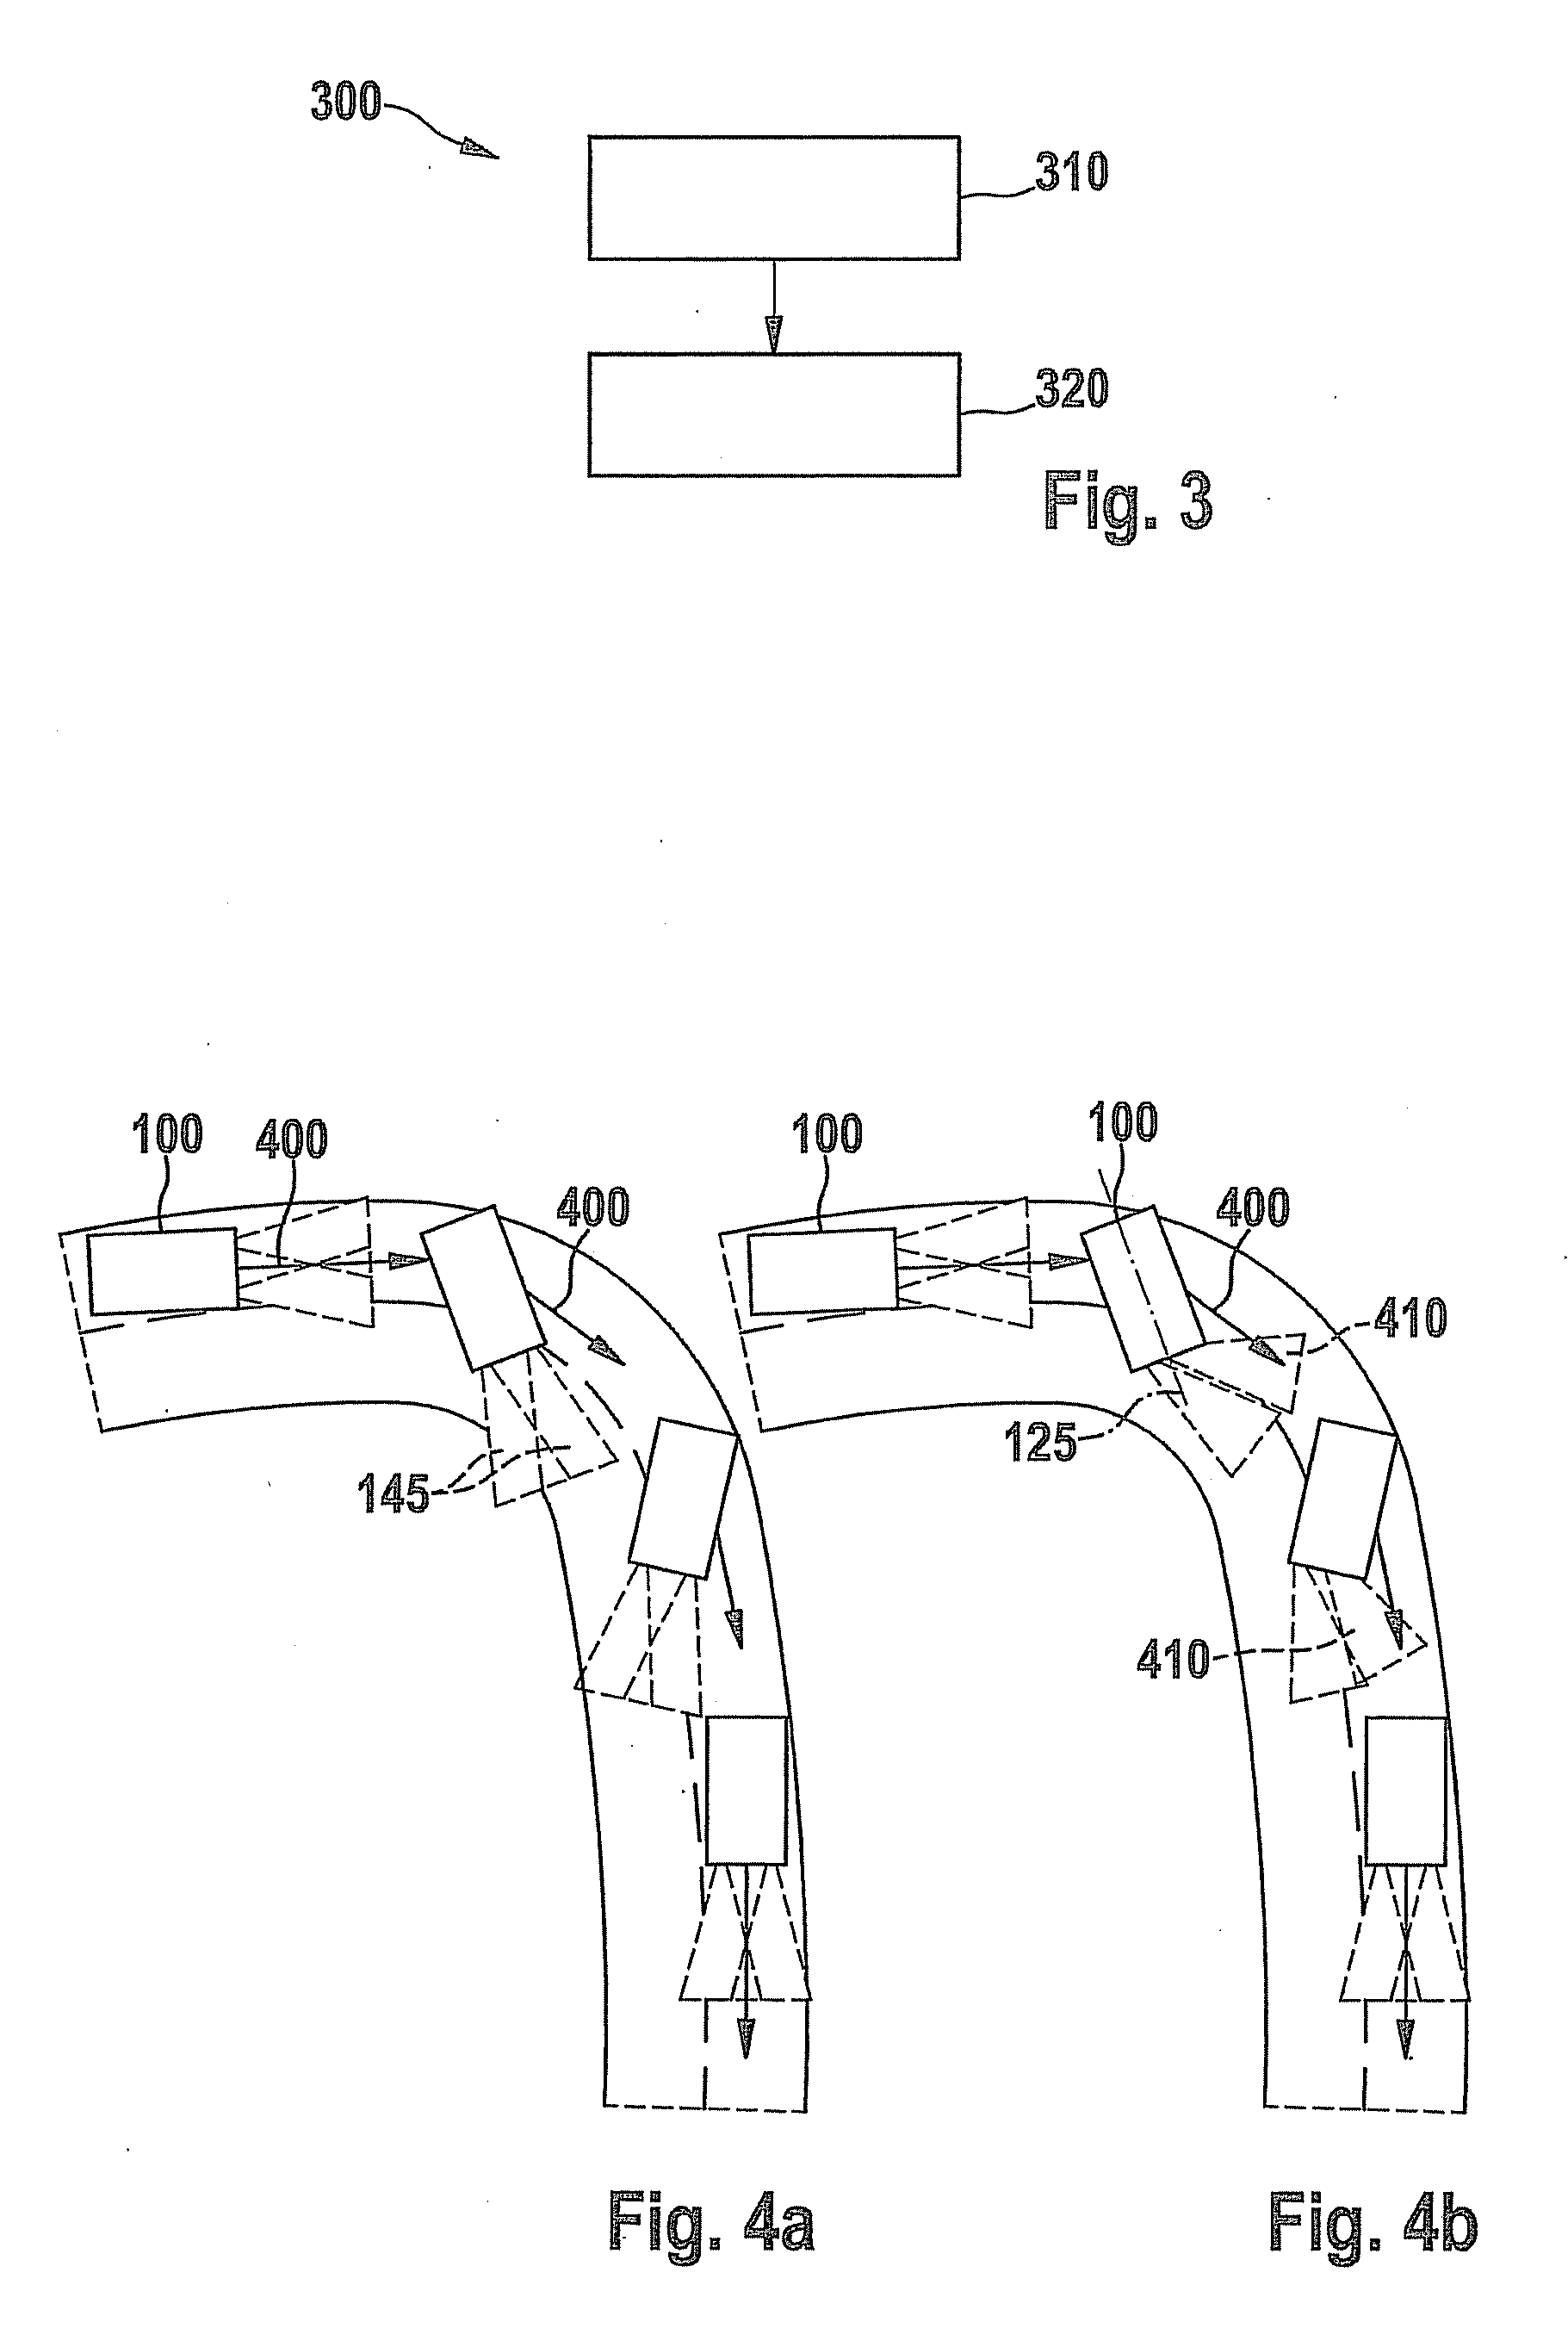 Method and device for adjusting a light emission of at least one headlight of a vehicle